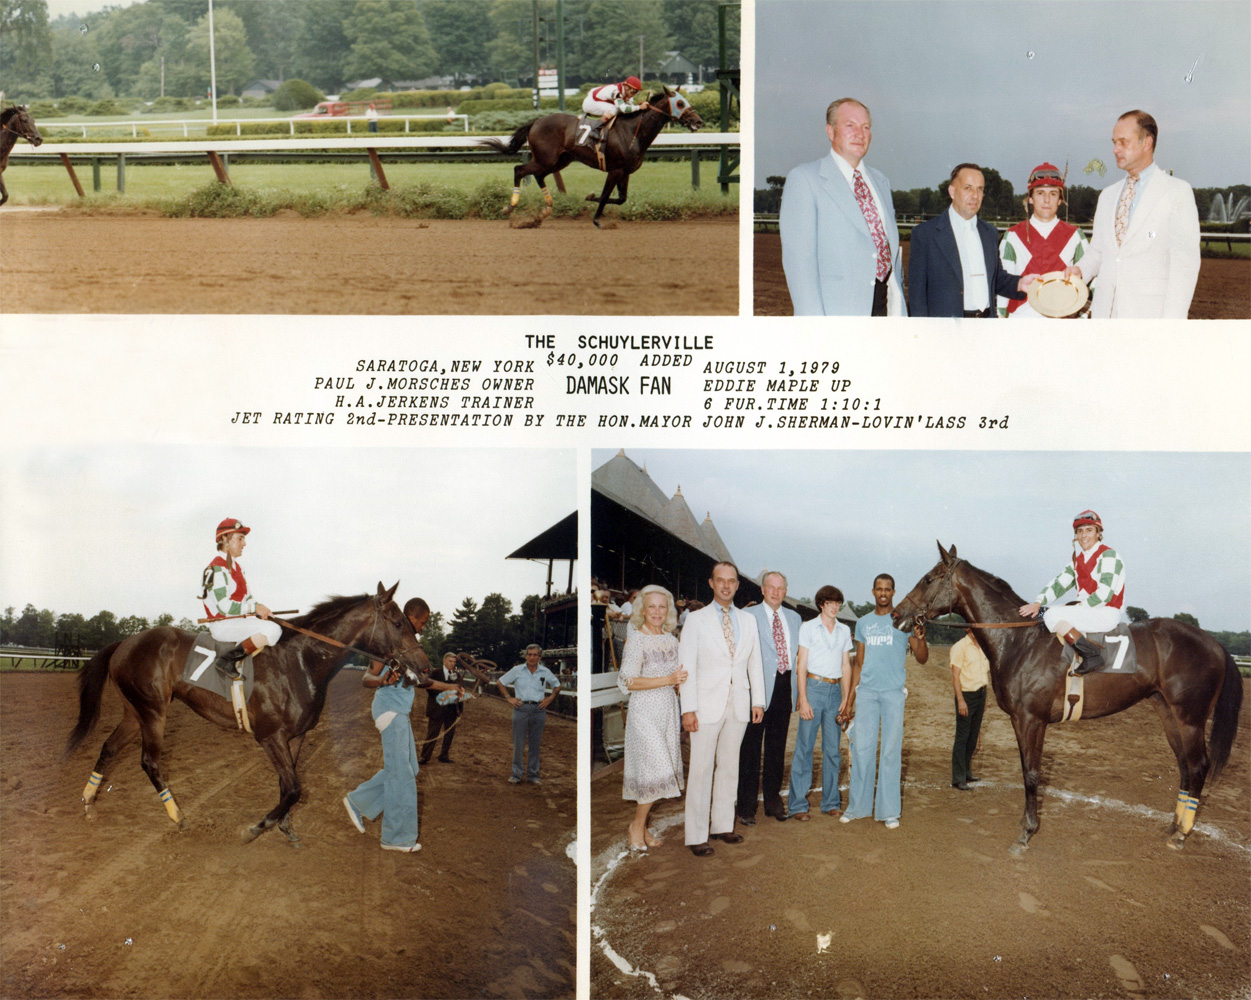 Win composite from the 1979 Schuylerville Stakes at Saratoga, won by Eddie Maple and Damask Fan (NYRA/Museum Collection)